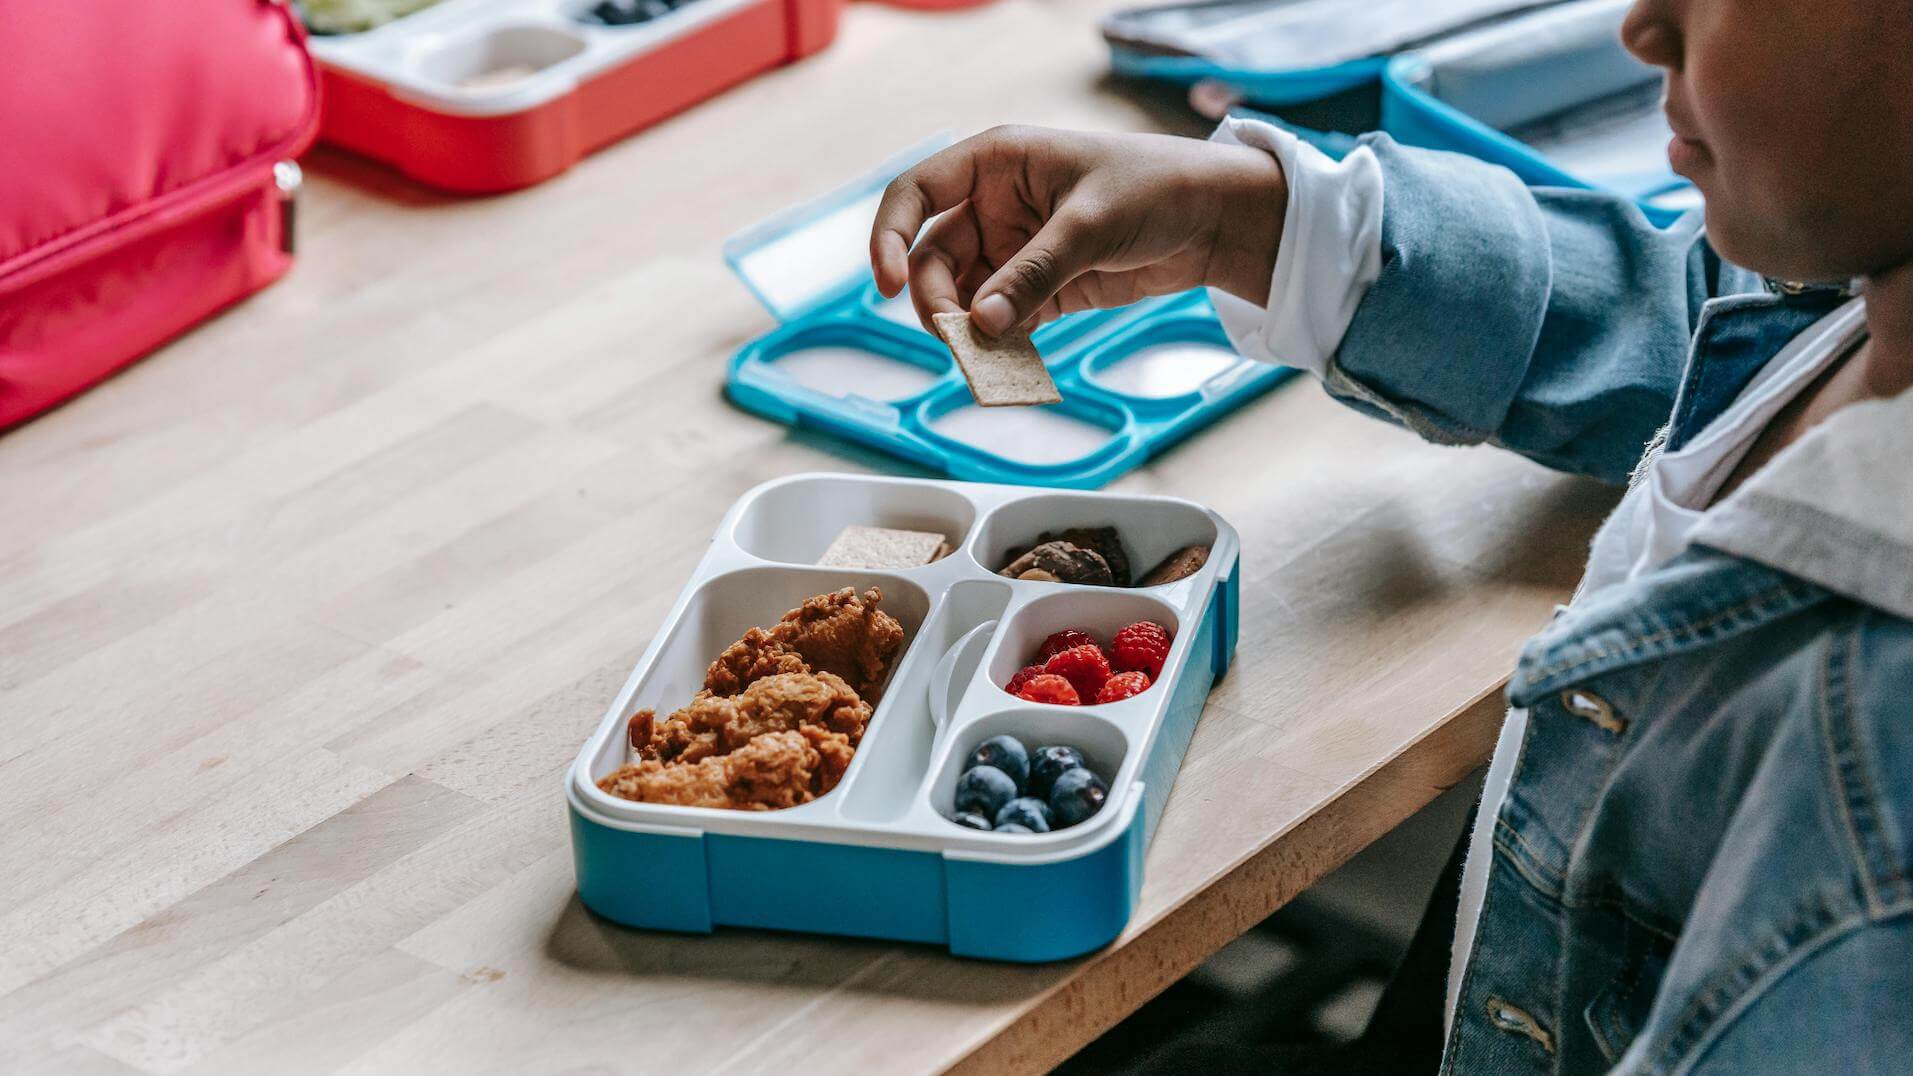 Gluten-free Living: back to school tips and gluten-free lunchbox ideas. Boy at school with his bento-style lunchbox filled with fried chicken, crackers, berries and raspberries.